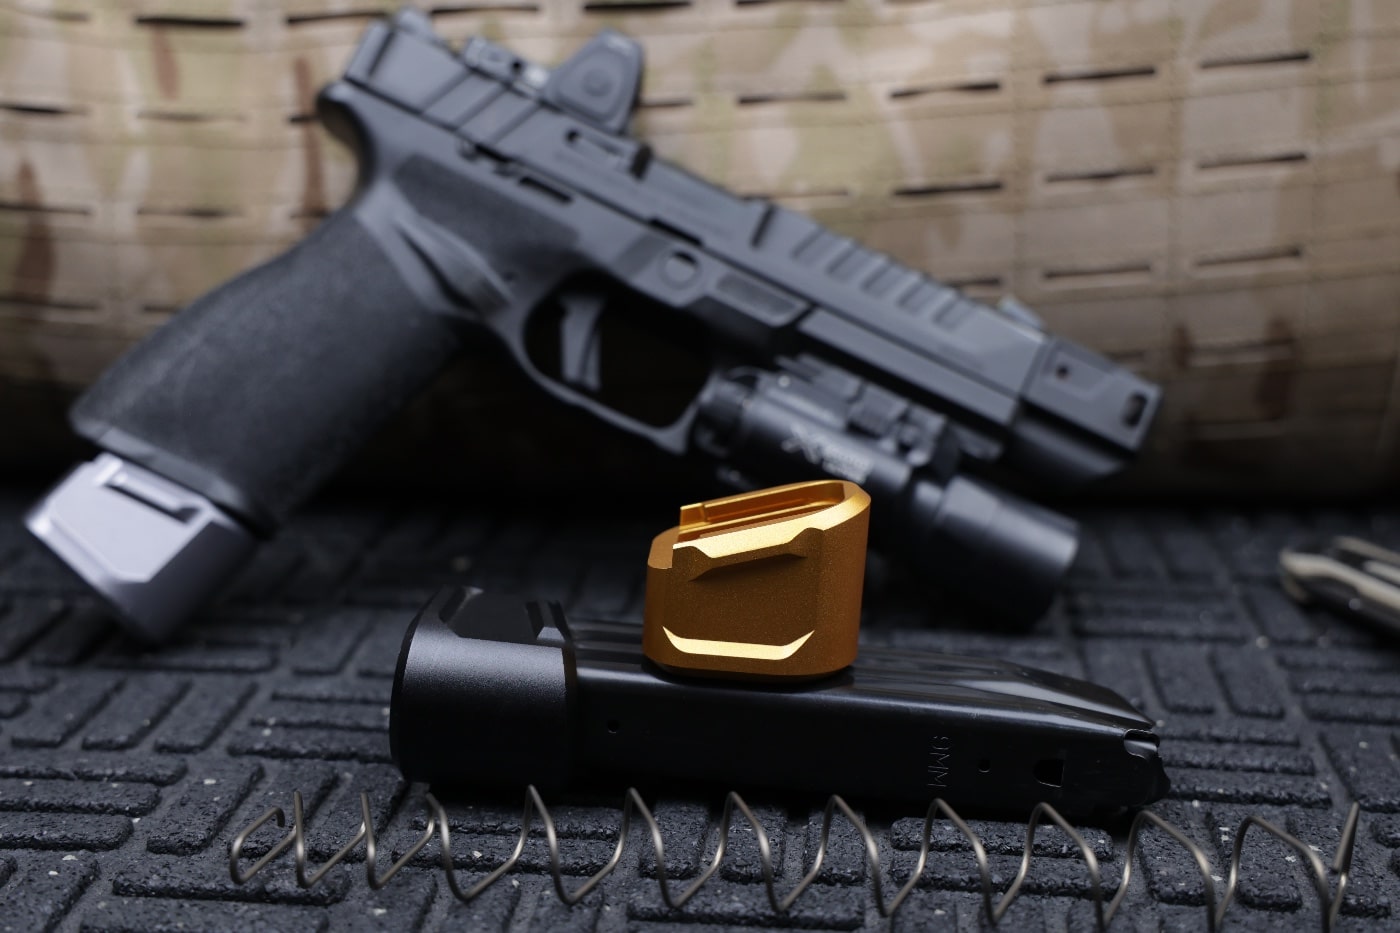 Tyrant CNC upgrade parts for Springfield Echelon magazine spring base. The Tyrant CNC magazine extension is machined from 6061 aluminum and features an anodized finish. It comes with a +10% spring to ensure consistent feeding of ammunition.